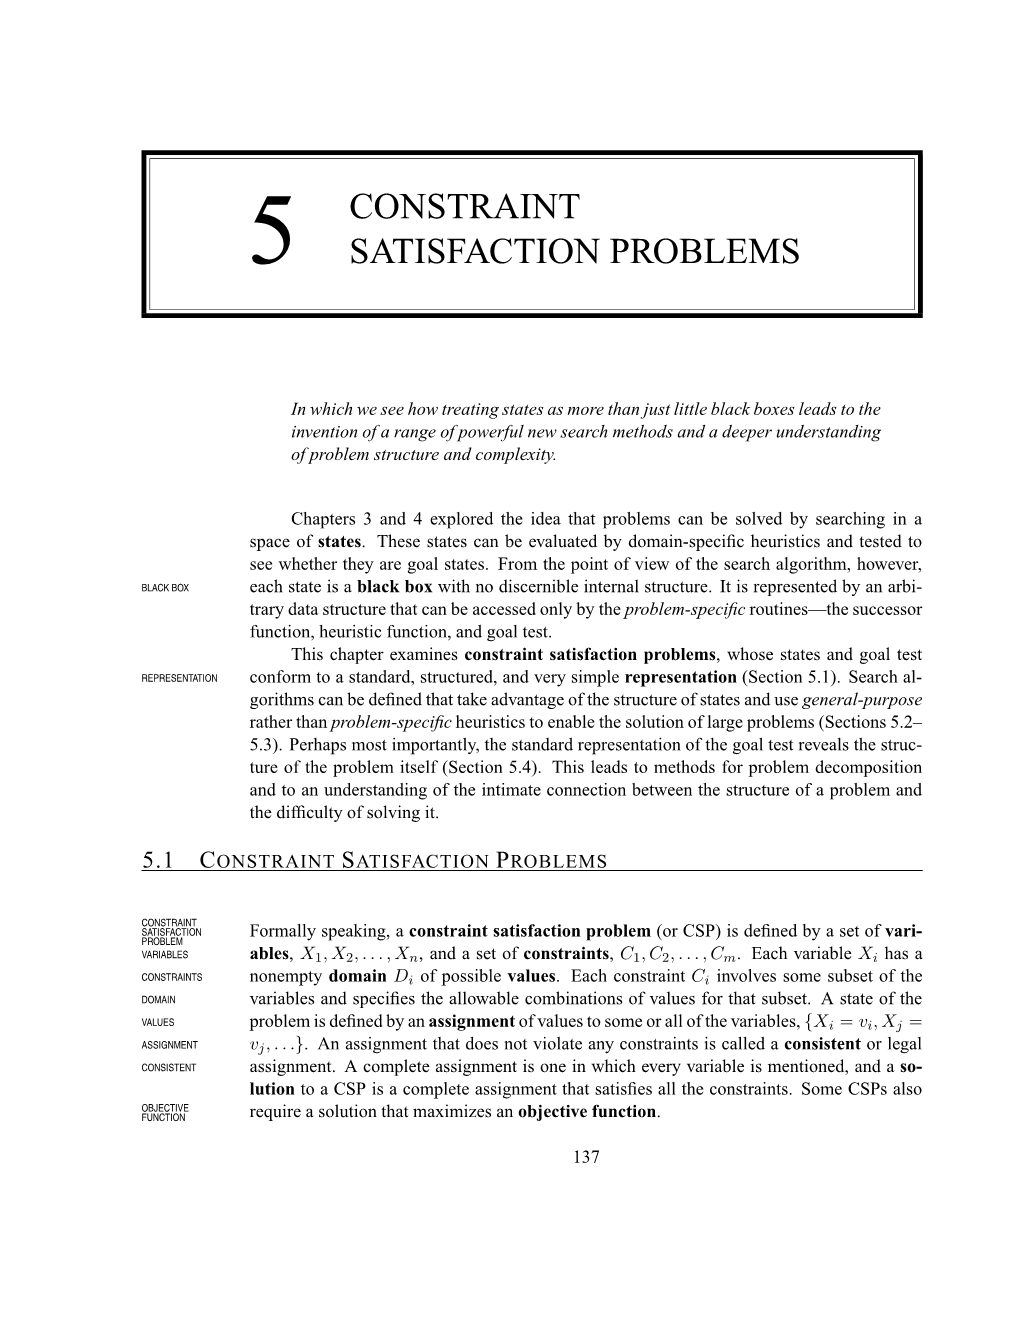 Constraint Satisfaction Problems, Whose States and Goal Test REPRESENTATION Conform to a Standard, Structured, and Very Simple Representation (Section 5.1)